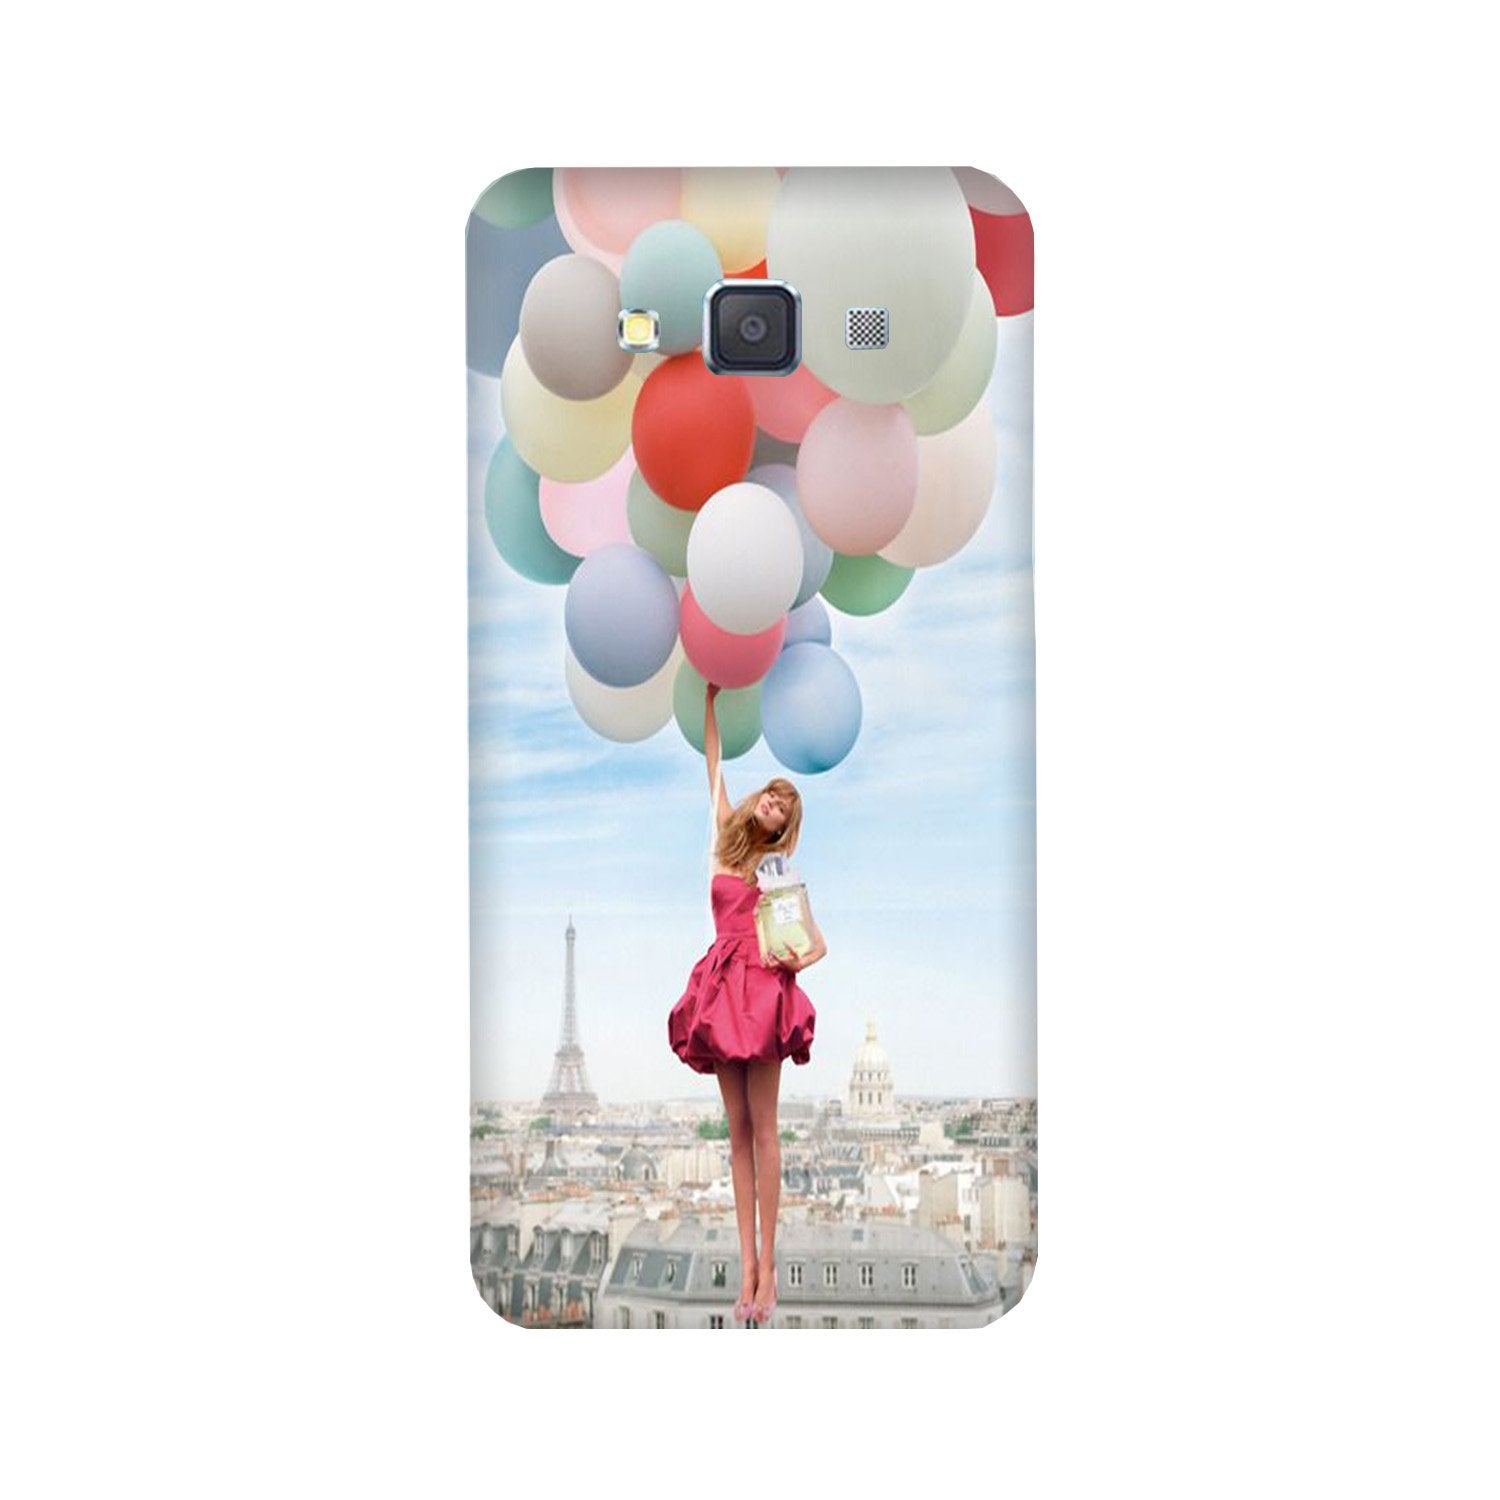 Girl with Baloon Case for Galaxy Grand Prime